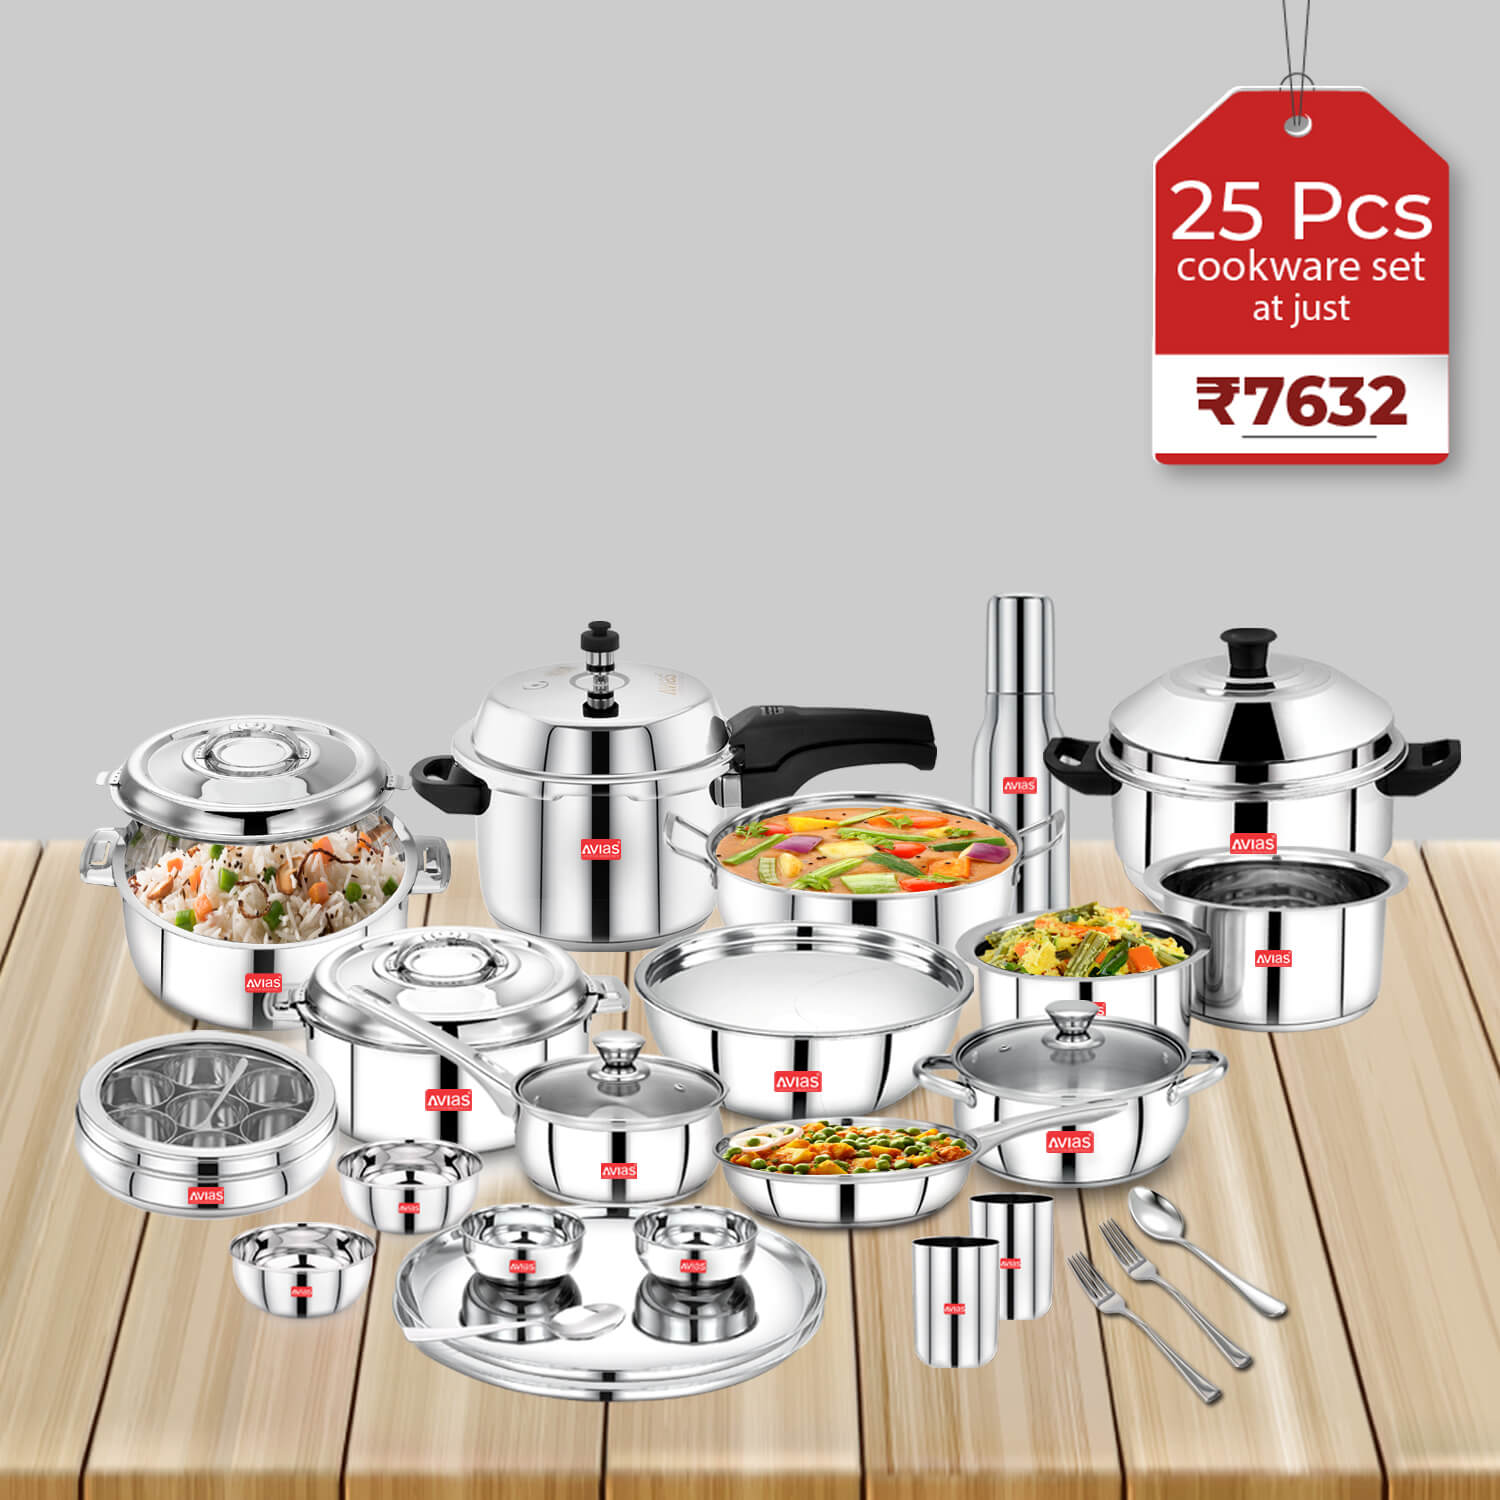 Avias Stainless Steel 25 PCS Kitchen set | Standard | High grade and Premium quality